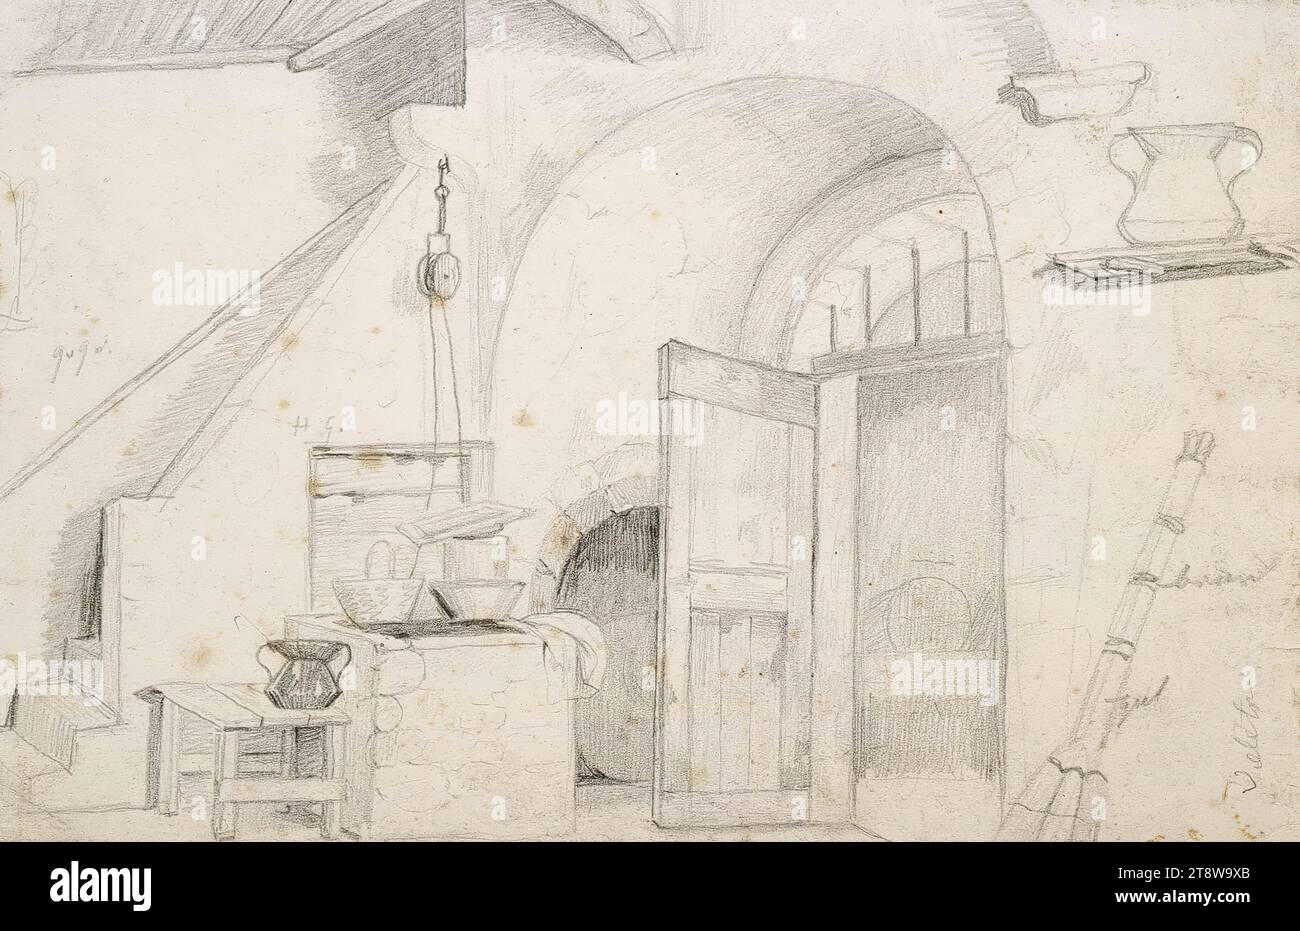 Robert Wilhelm Ekman, 13.8.1808, Uusikaupunki, 19.2.1873, Turku, AIHE from Italy: Interior. In the middle a well, on the right an open door, on the left a staircase leading to the upper floor., 14.5 × 22 cm, pencil Stock Photo